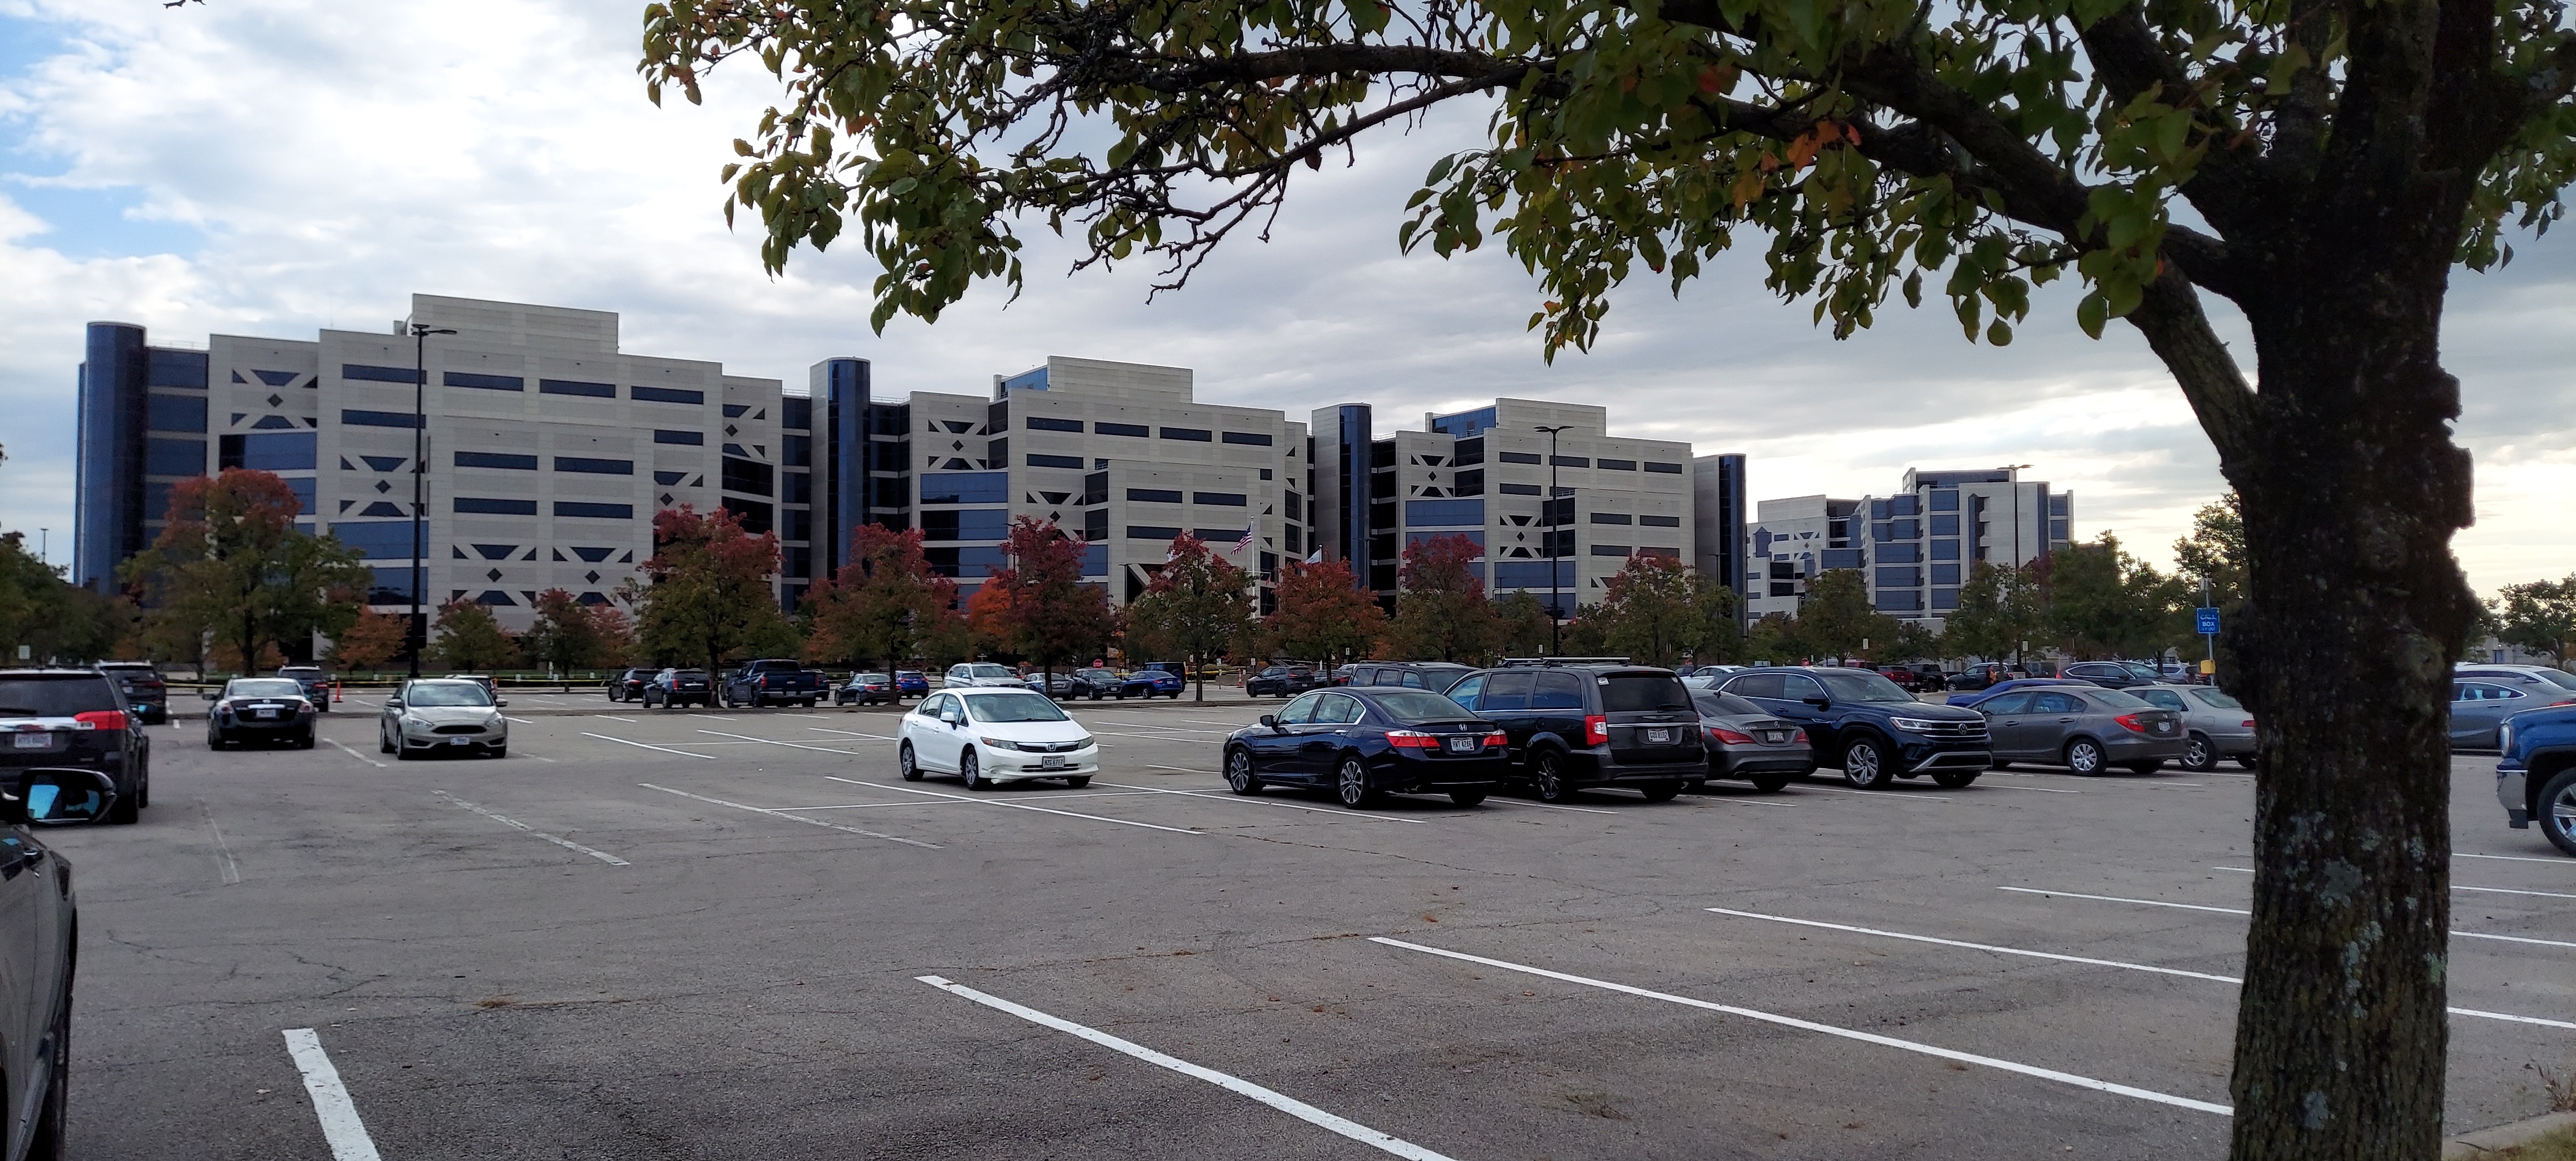 Large building complex which has three sections and is tan with dark windows and rises seven stories. Photo taken in Fall of 2022 which shows the view from the front of the building from the large parking lot. Trees are starting to change colors amidst the cars parked in the lot. 